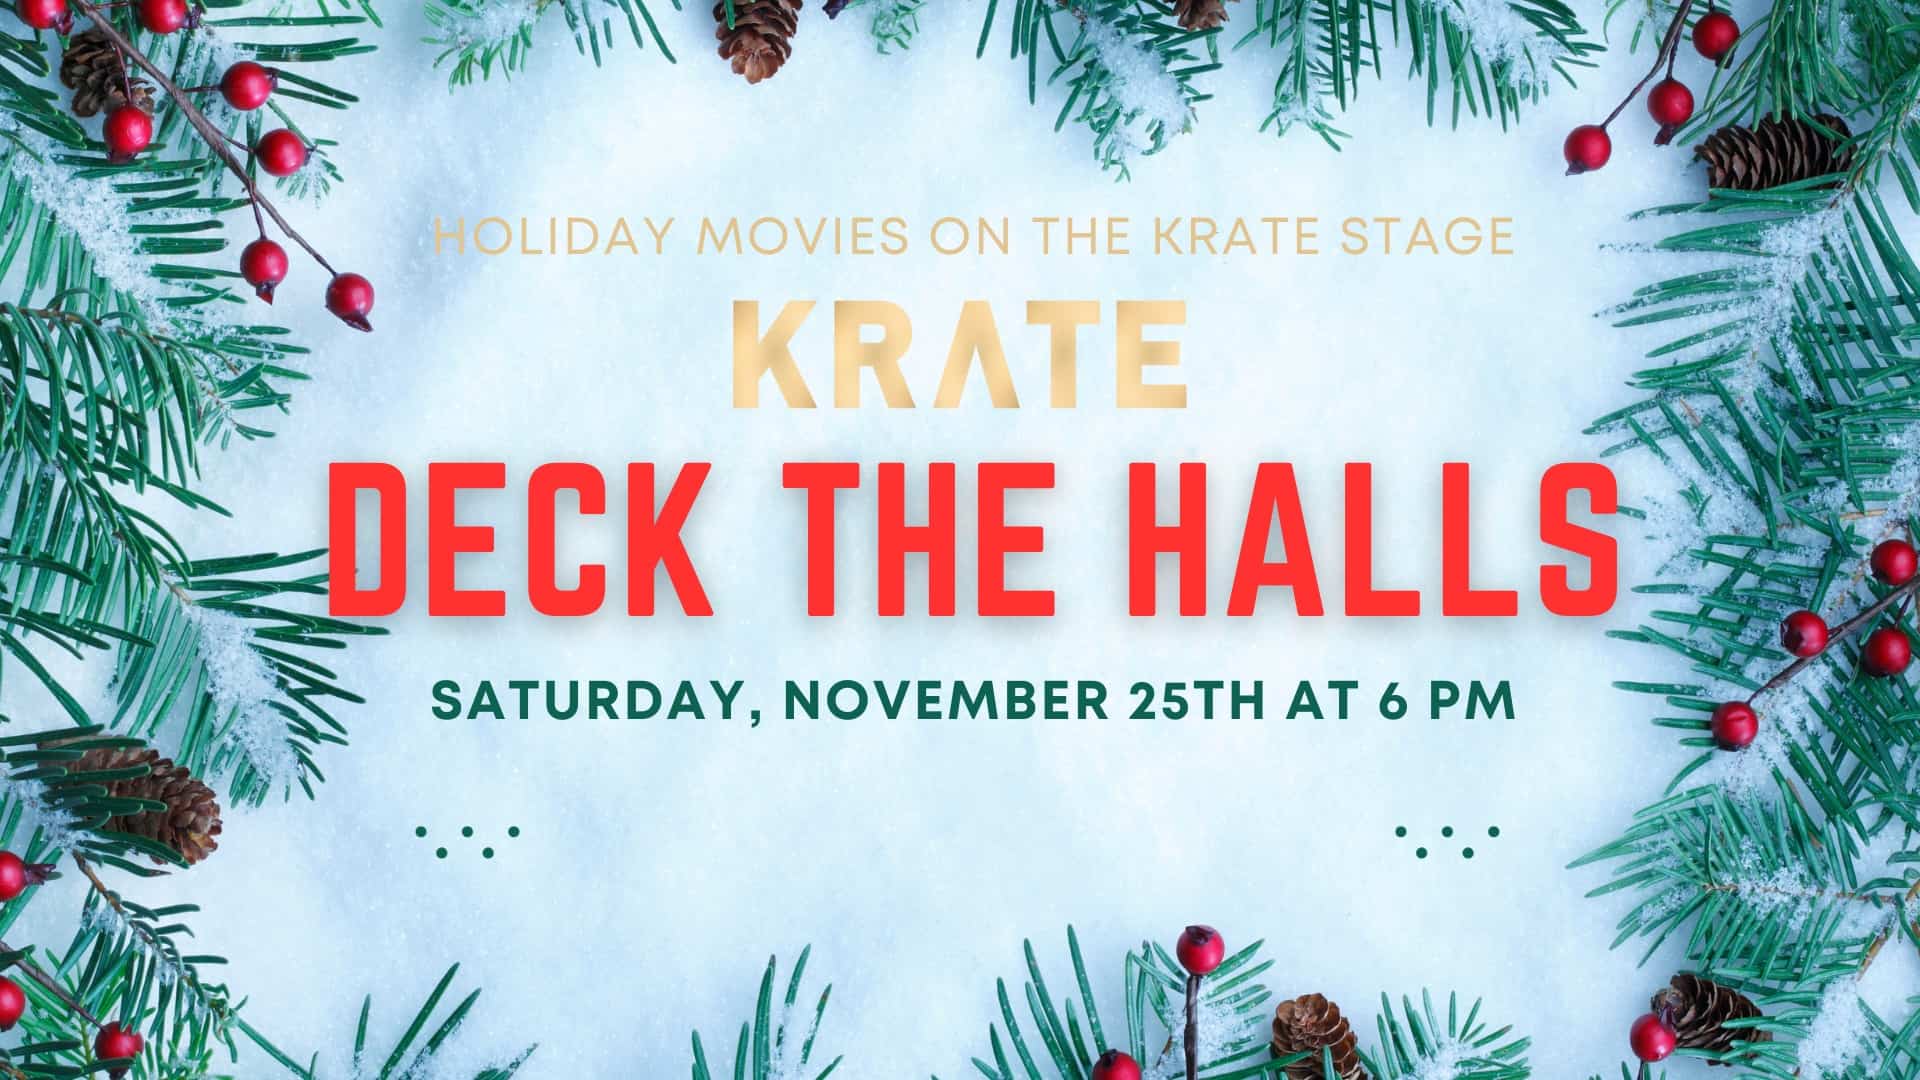 Deck the Halls at KRATE